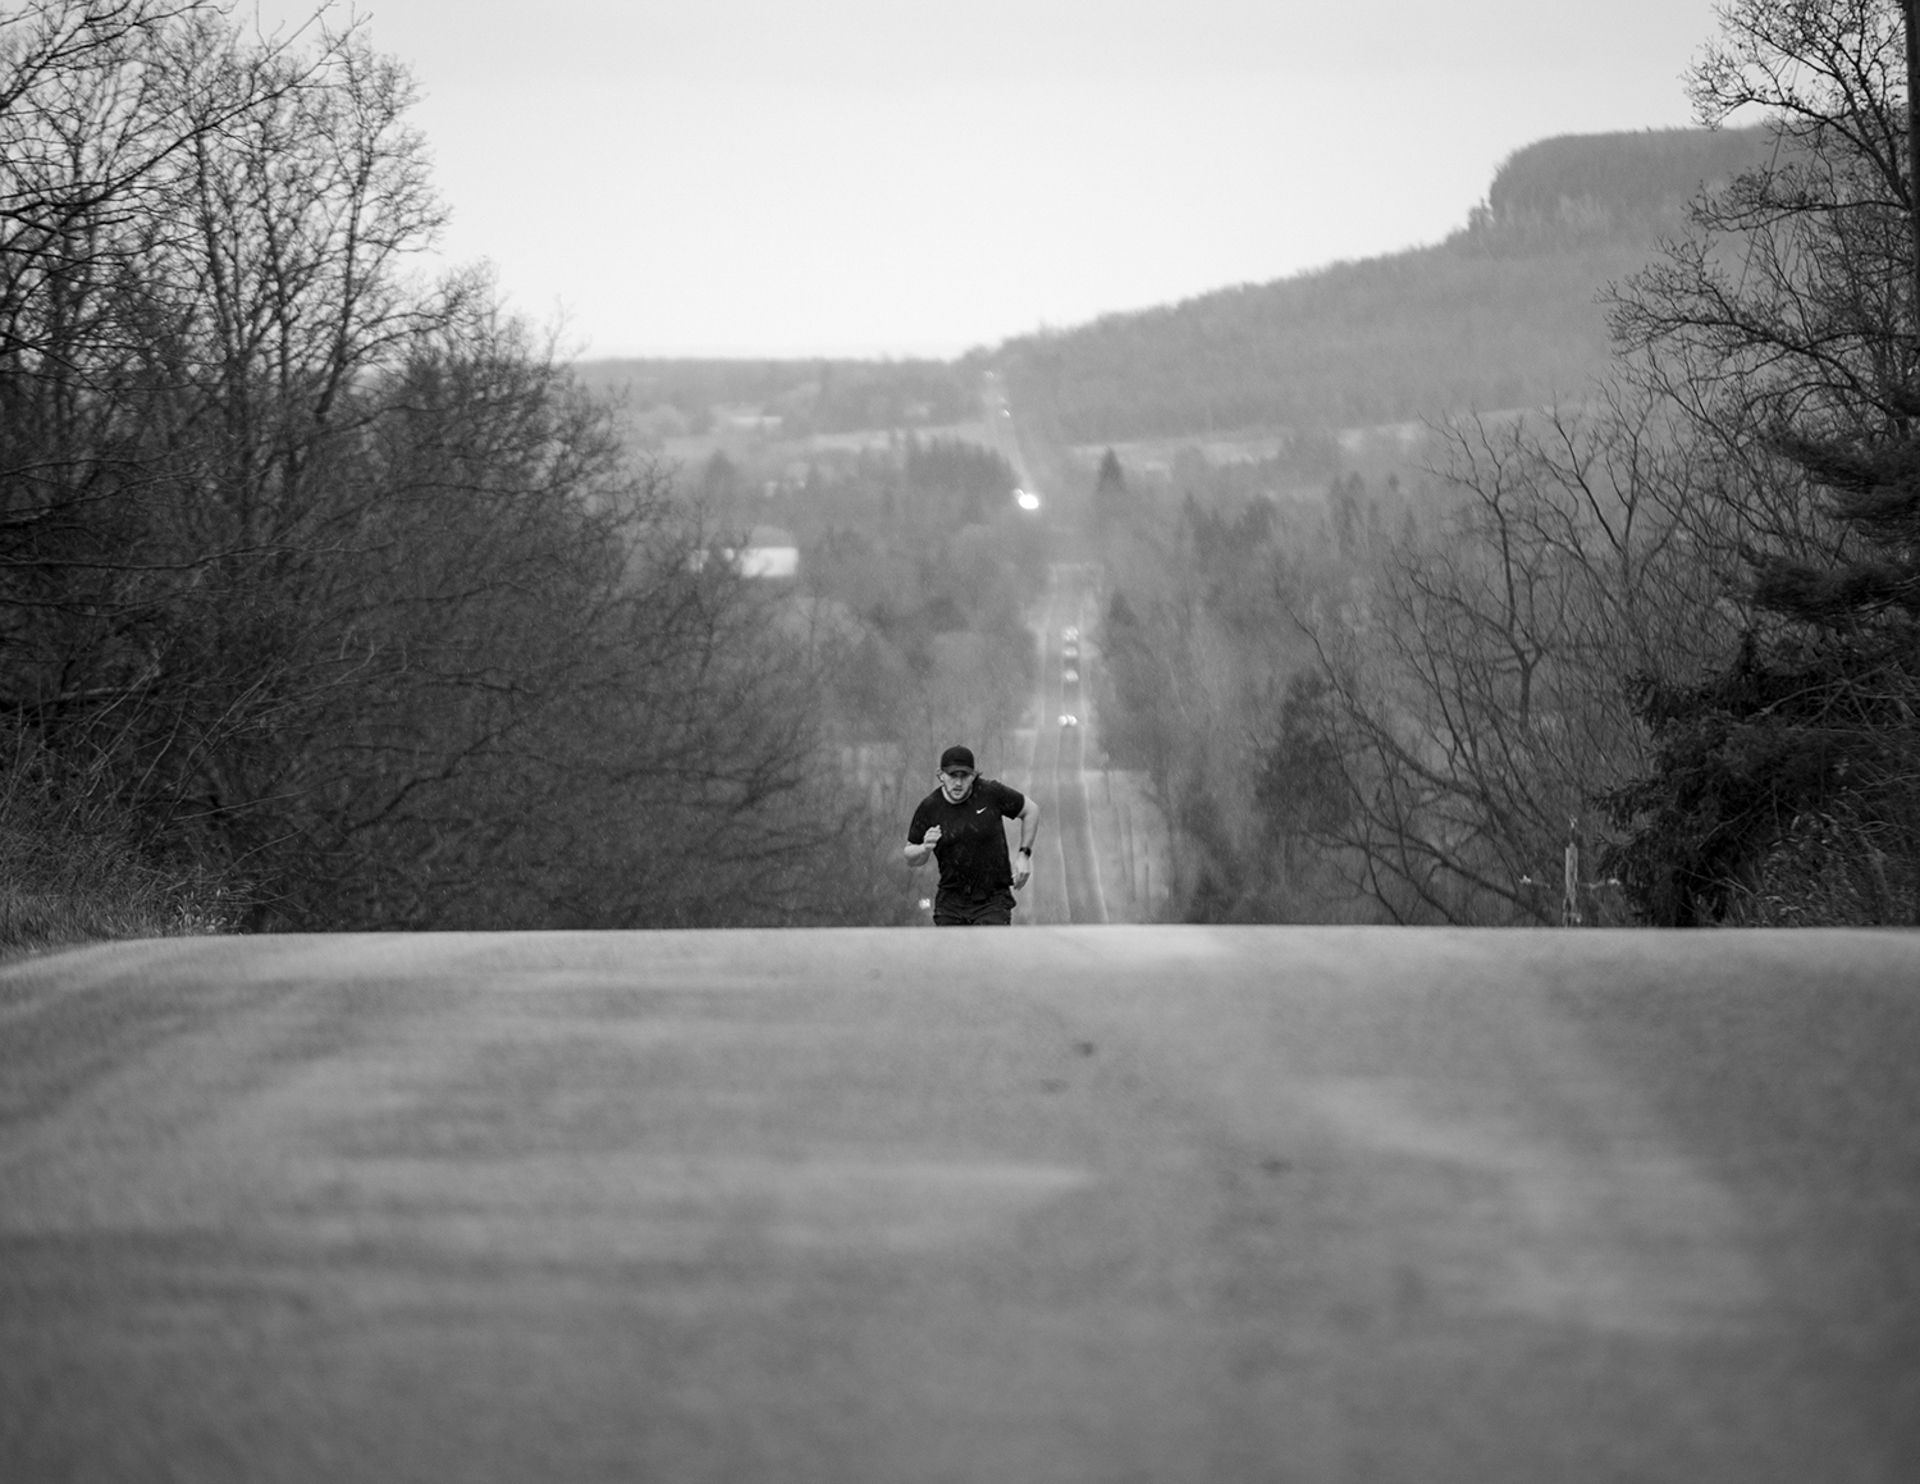 The photo depicted is in black and white. A man is running up a steep road. He is wearing all black and is captured striding up the road free of cars.